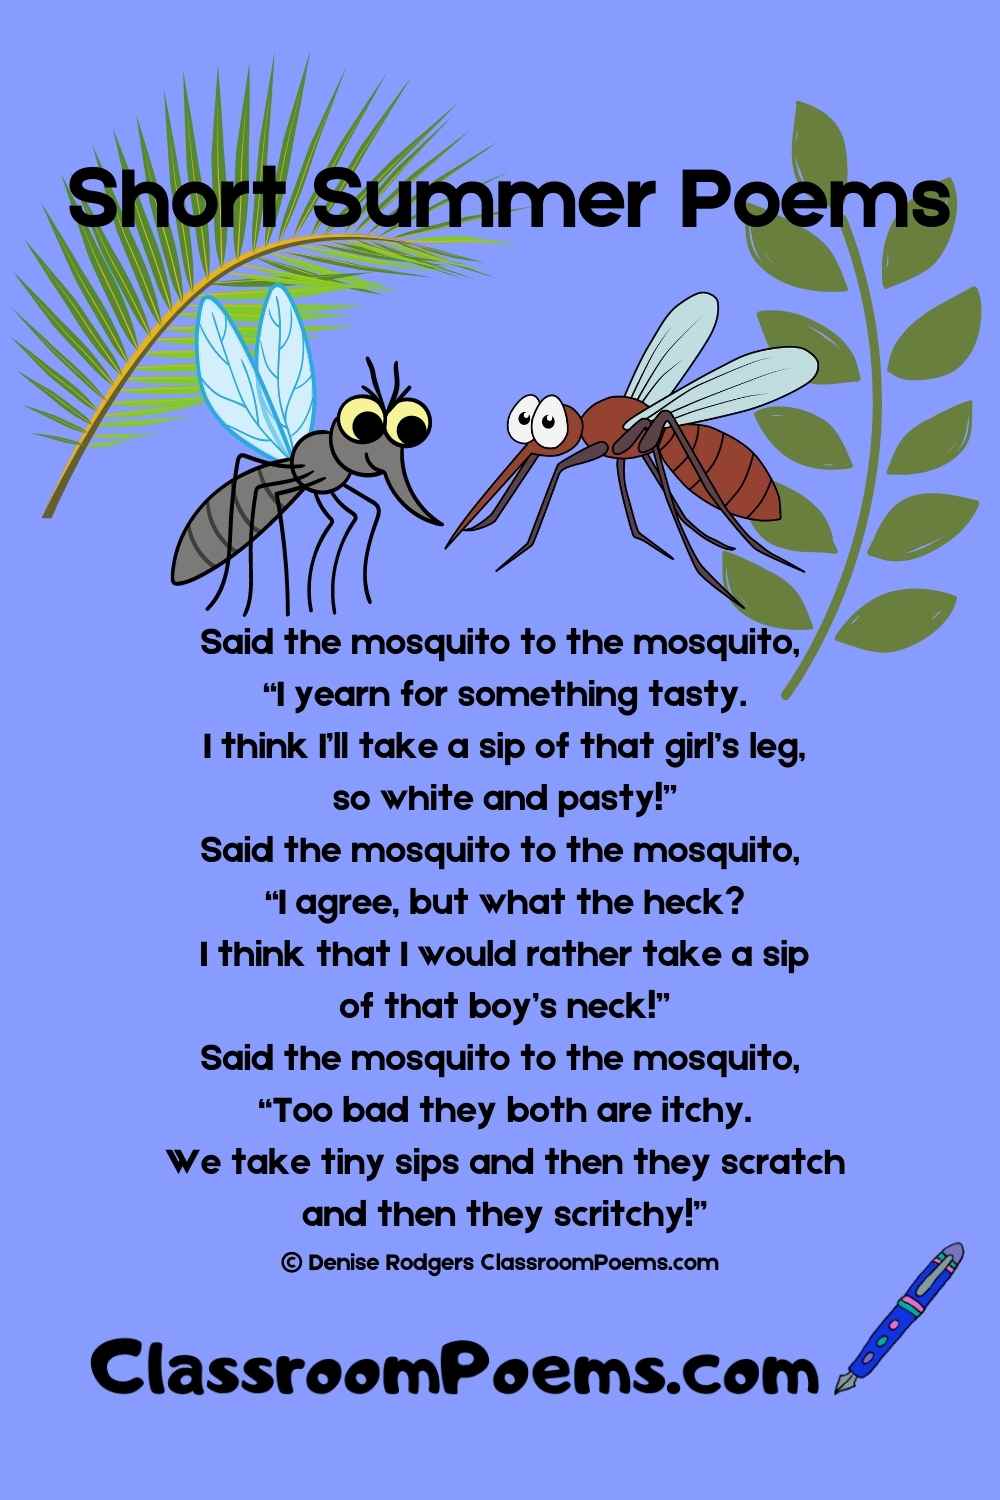 Summer poem about mosquitos by Denise Rodgers on ClassroomPoems.com.